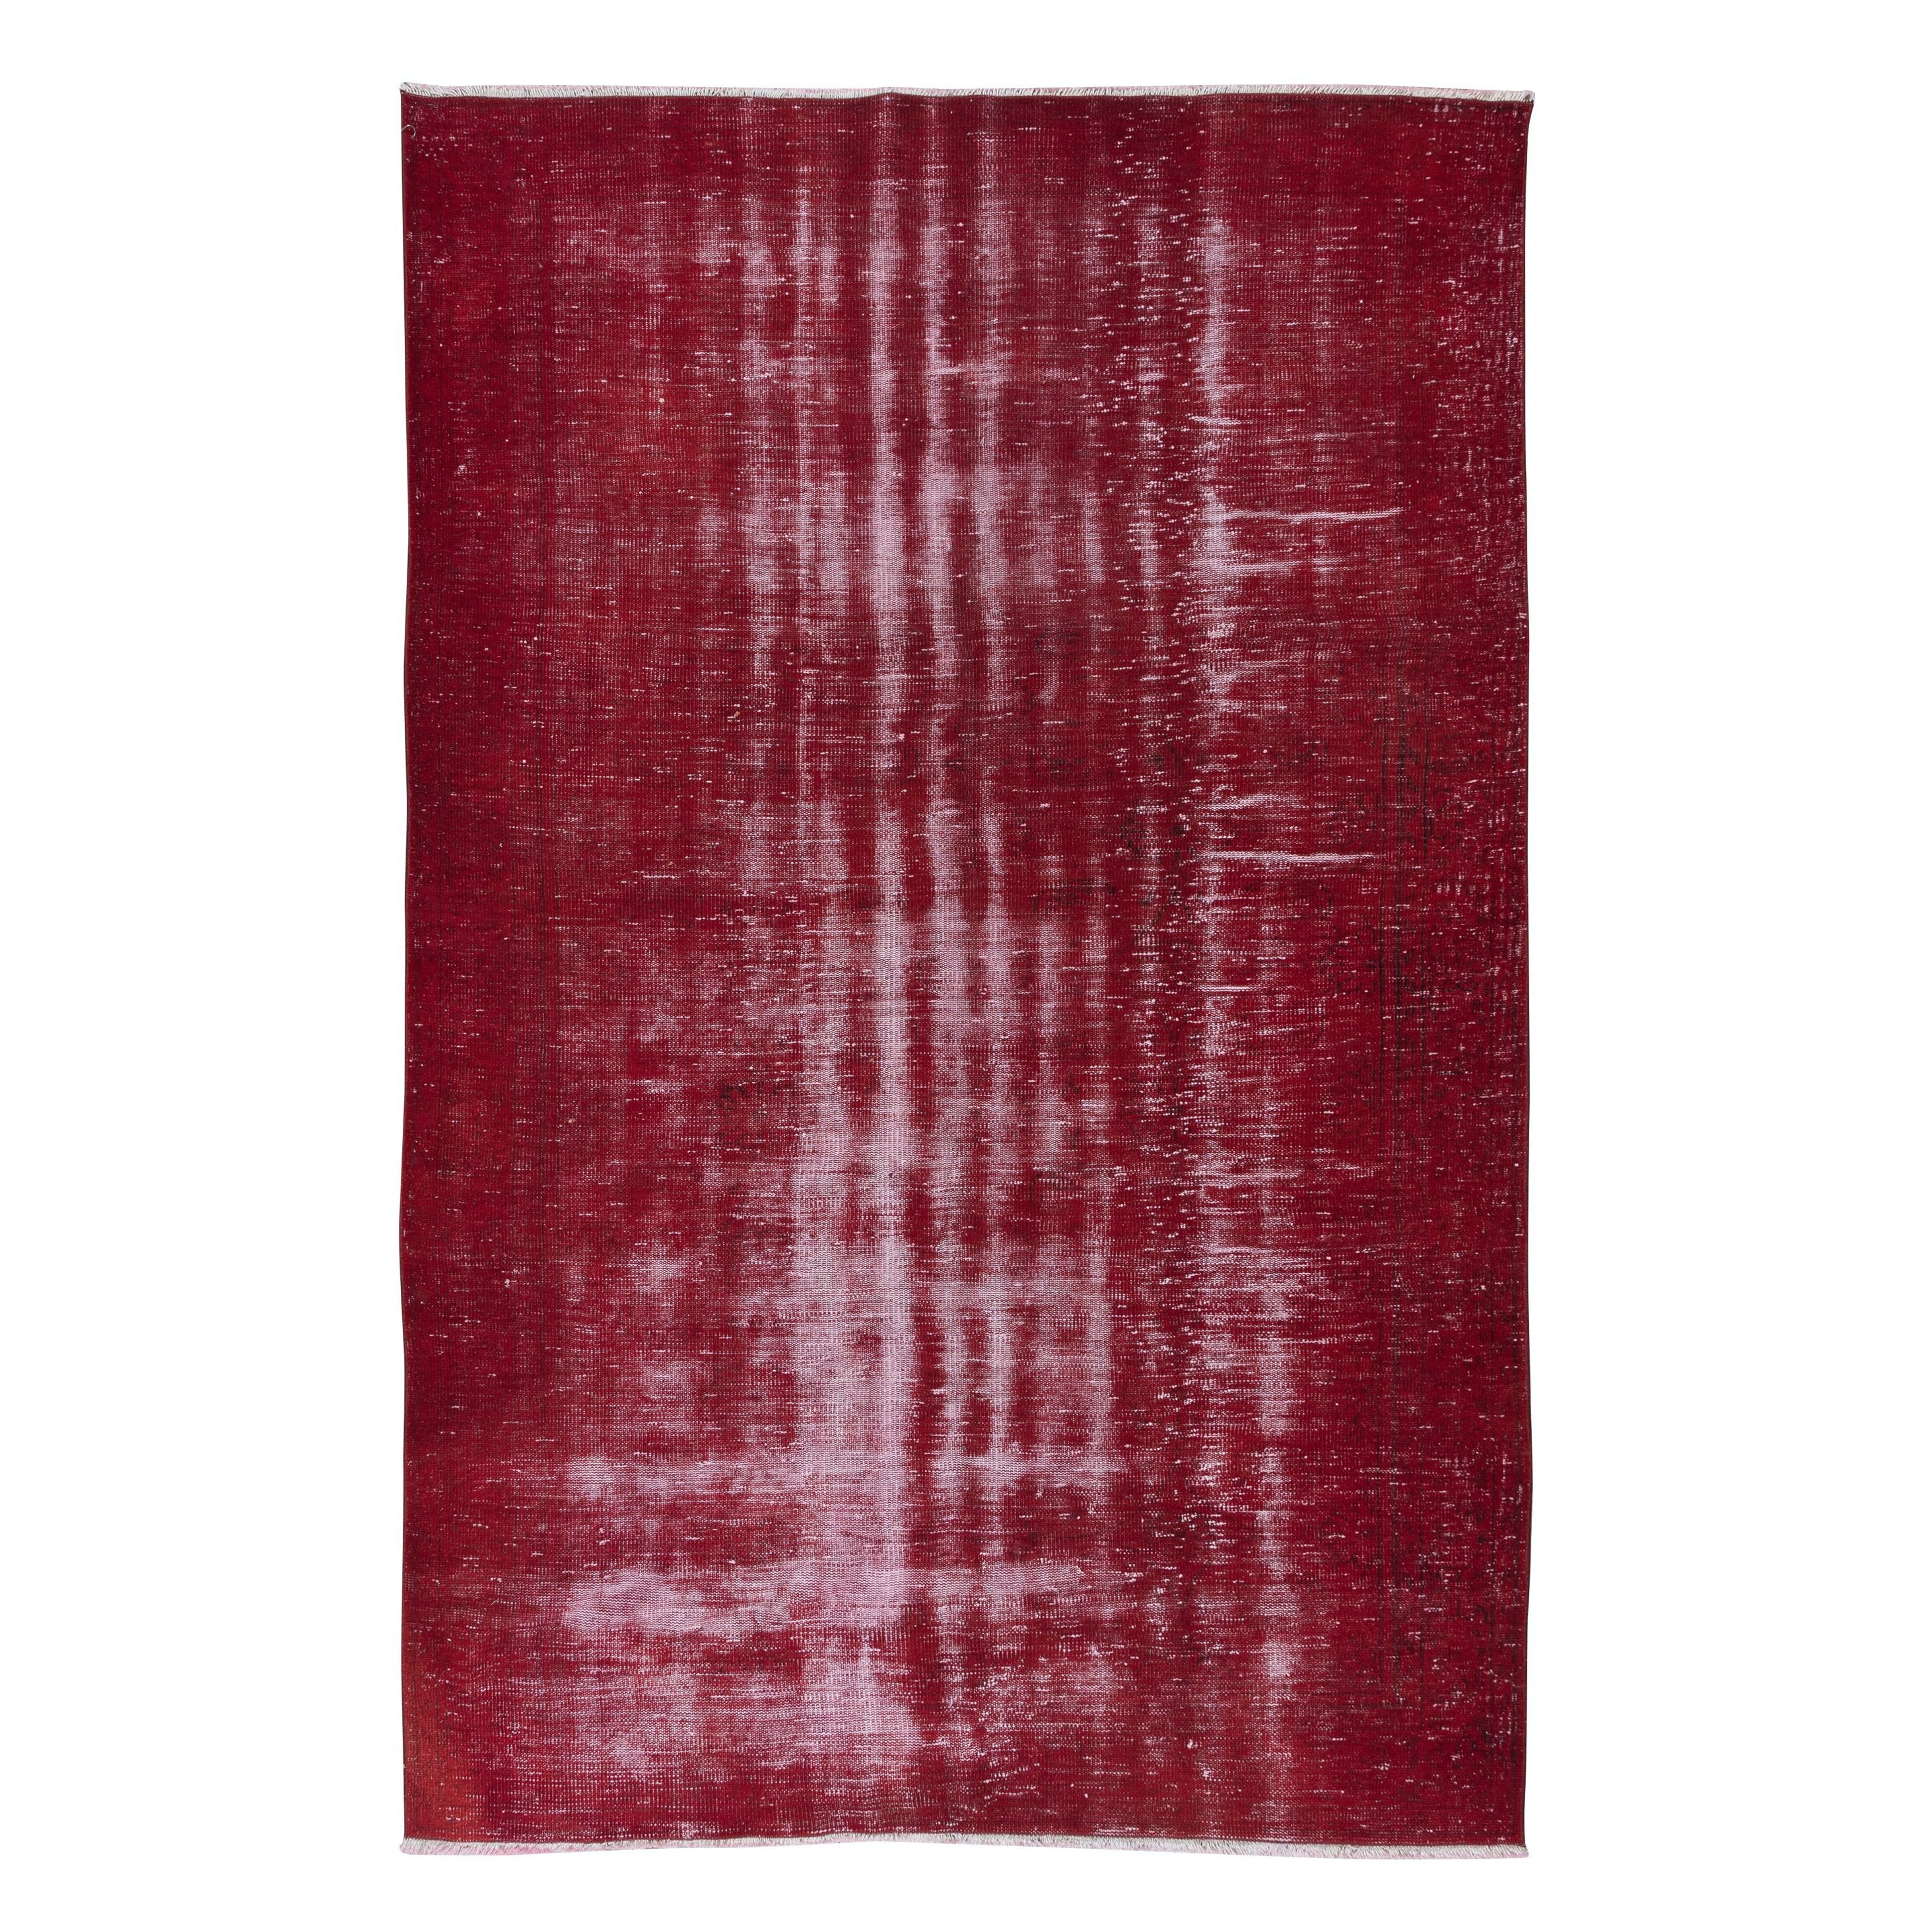 6x9.2 Ft Shabby Chic Modern Turkish Wool Red Rug, Handmade Distressed Old Carpet For Sale